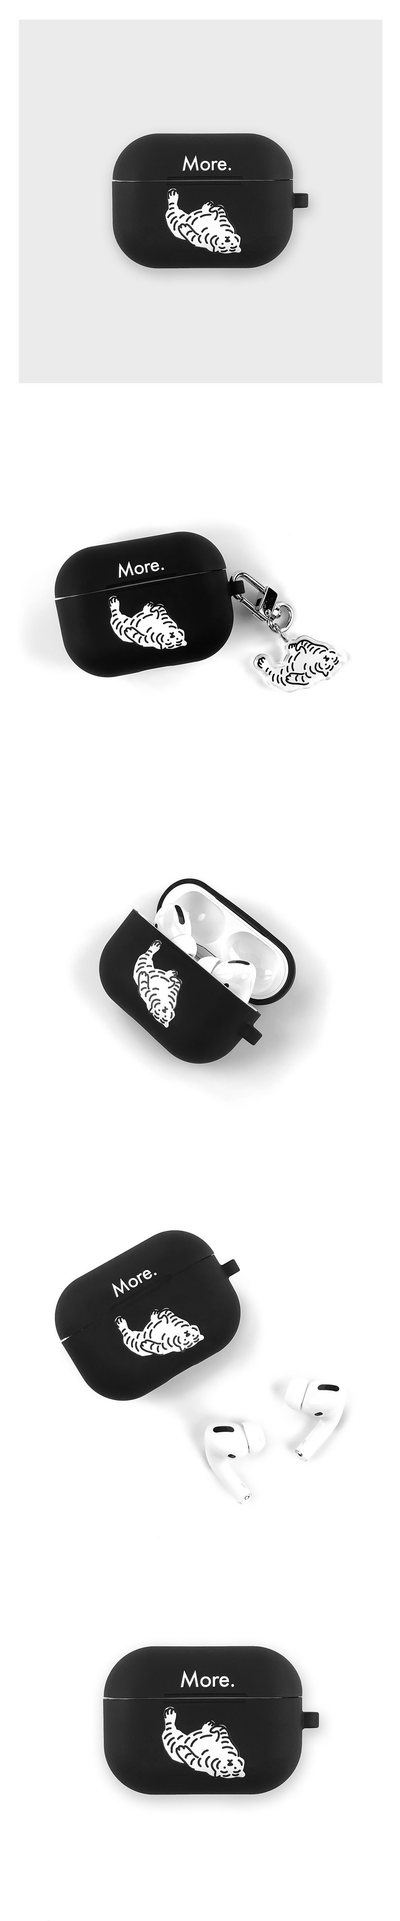 More Tiger AirPods Pro Case